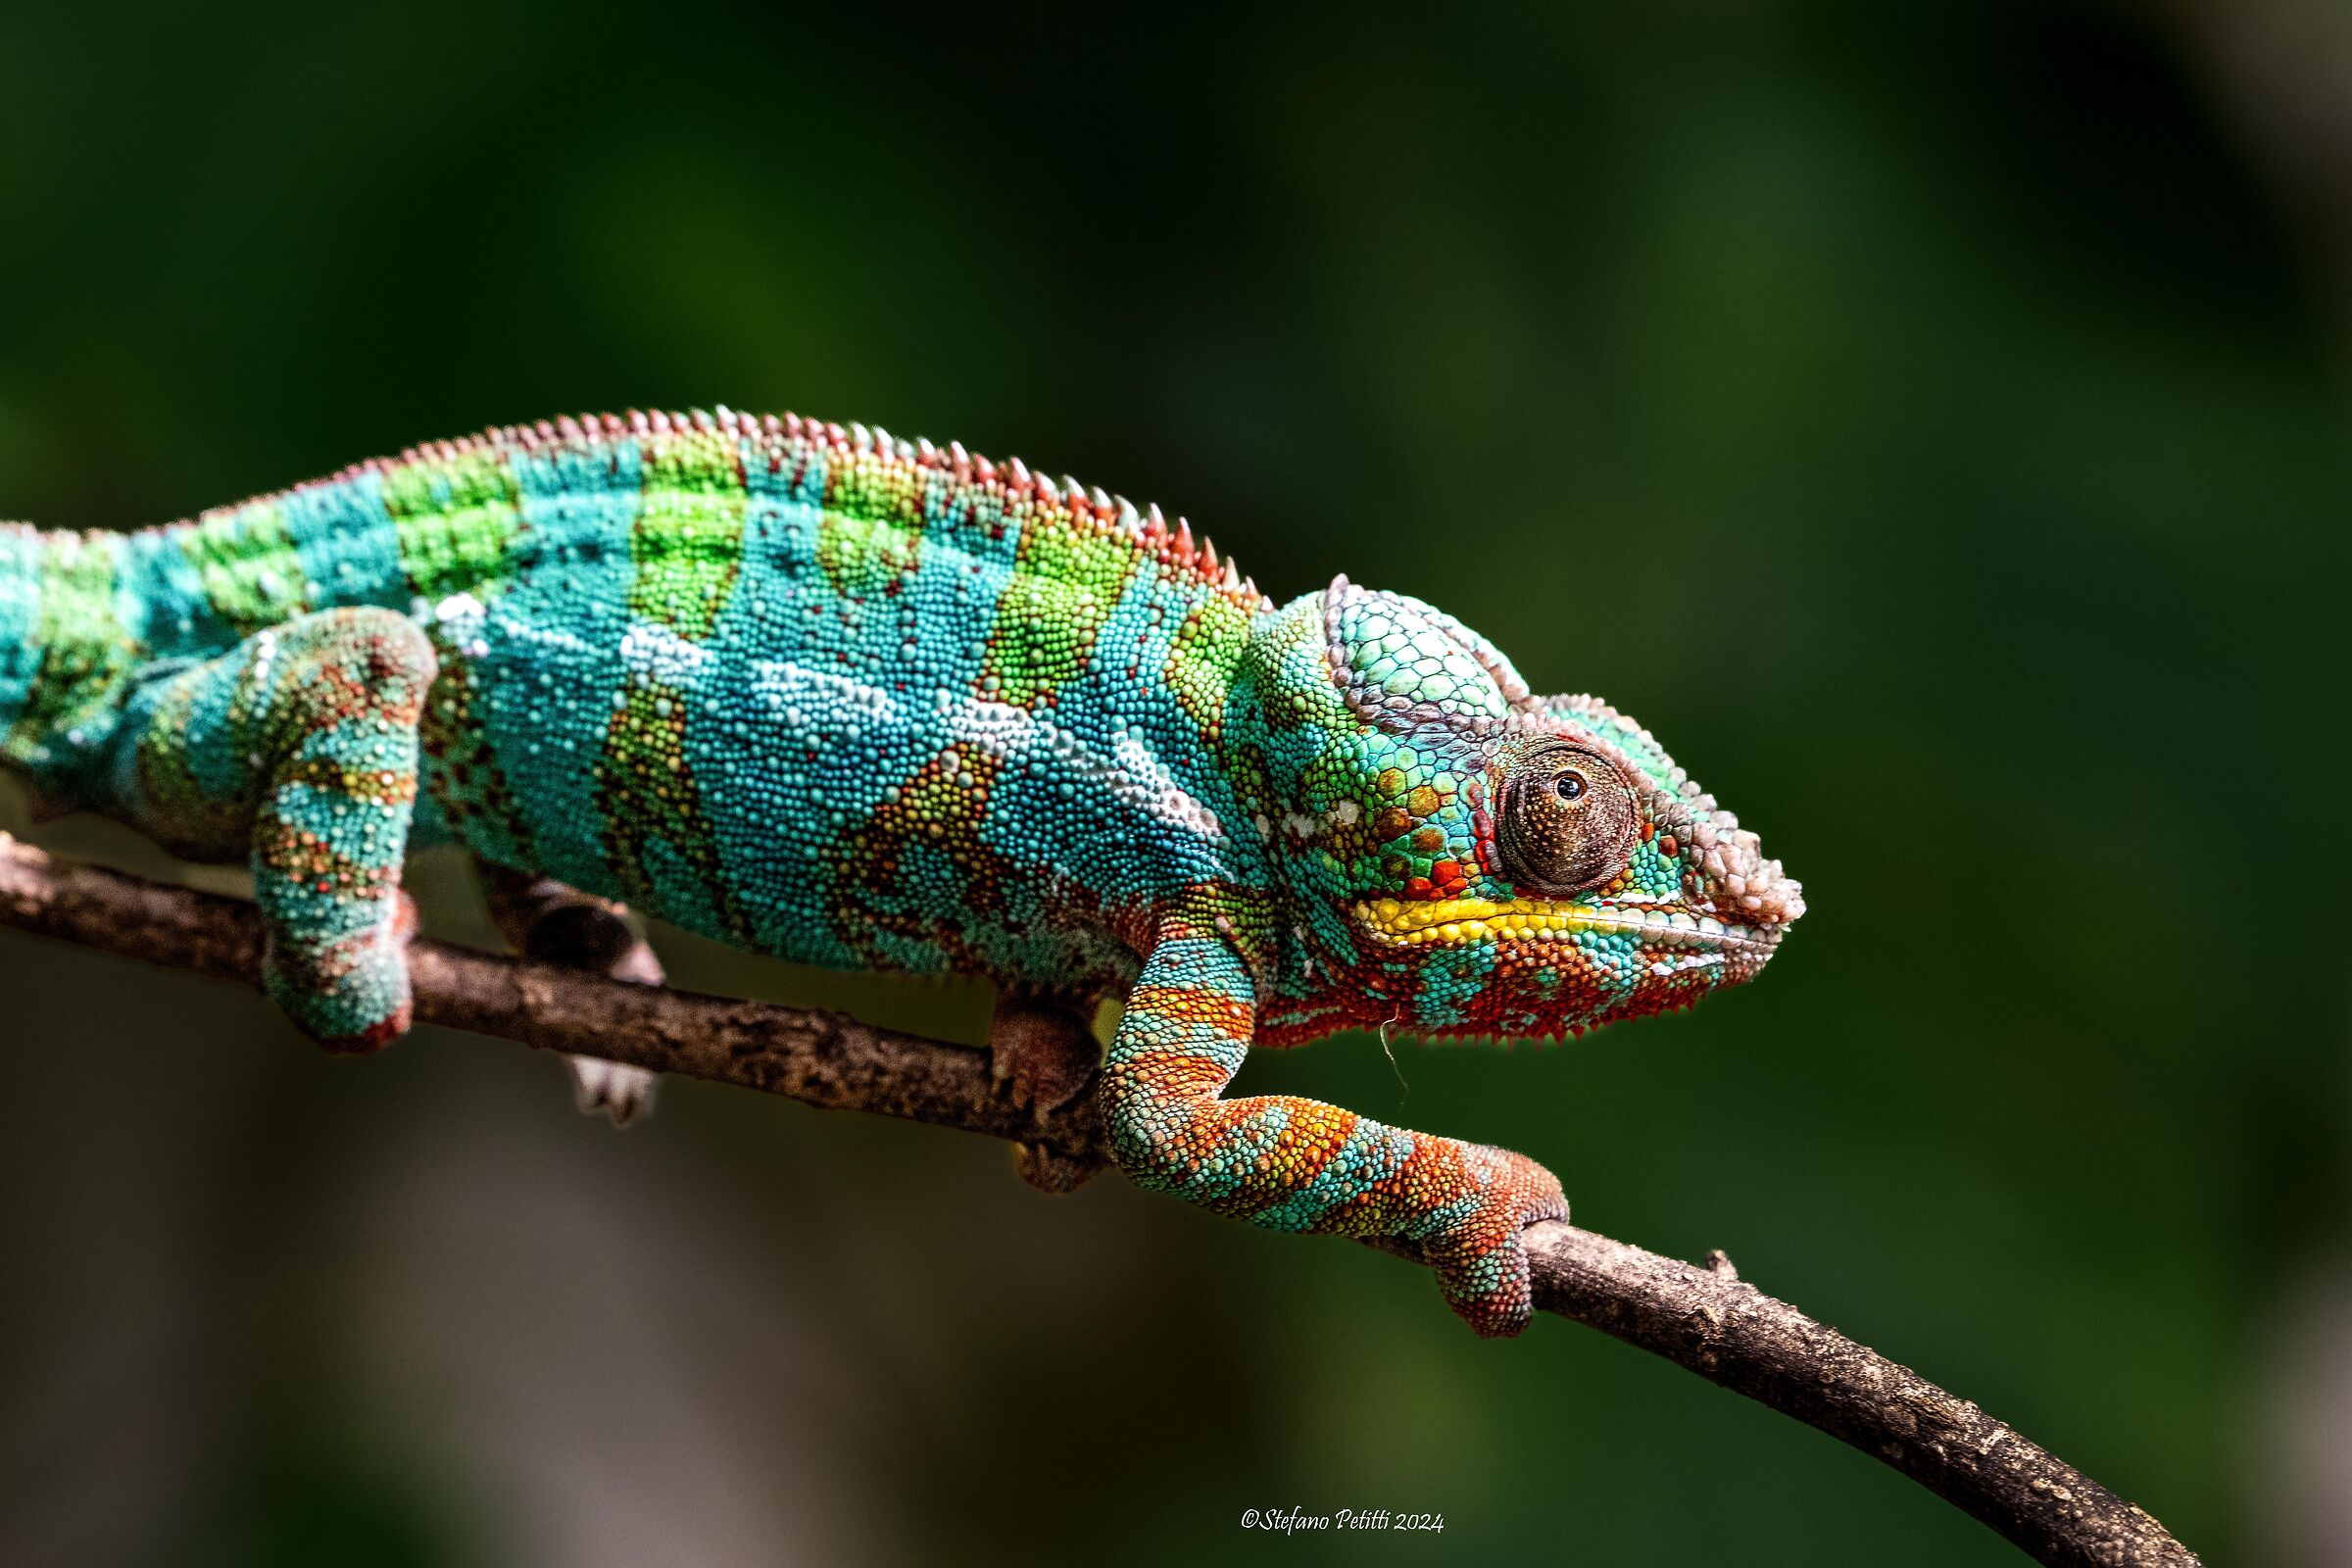 The colors of the chameleon...